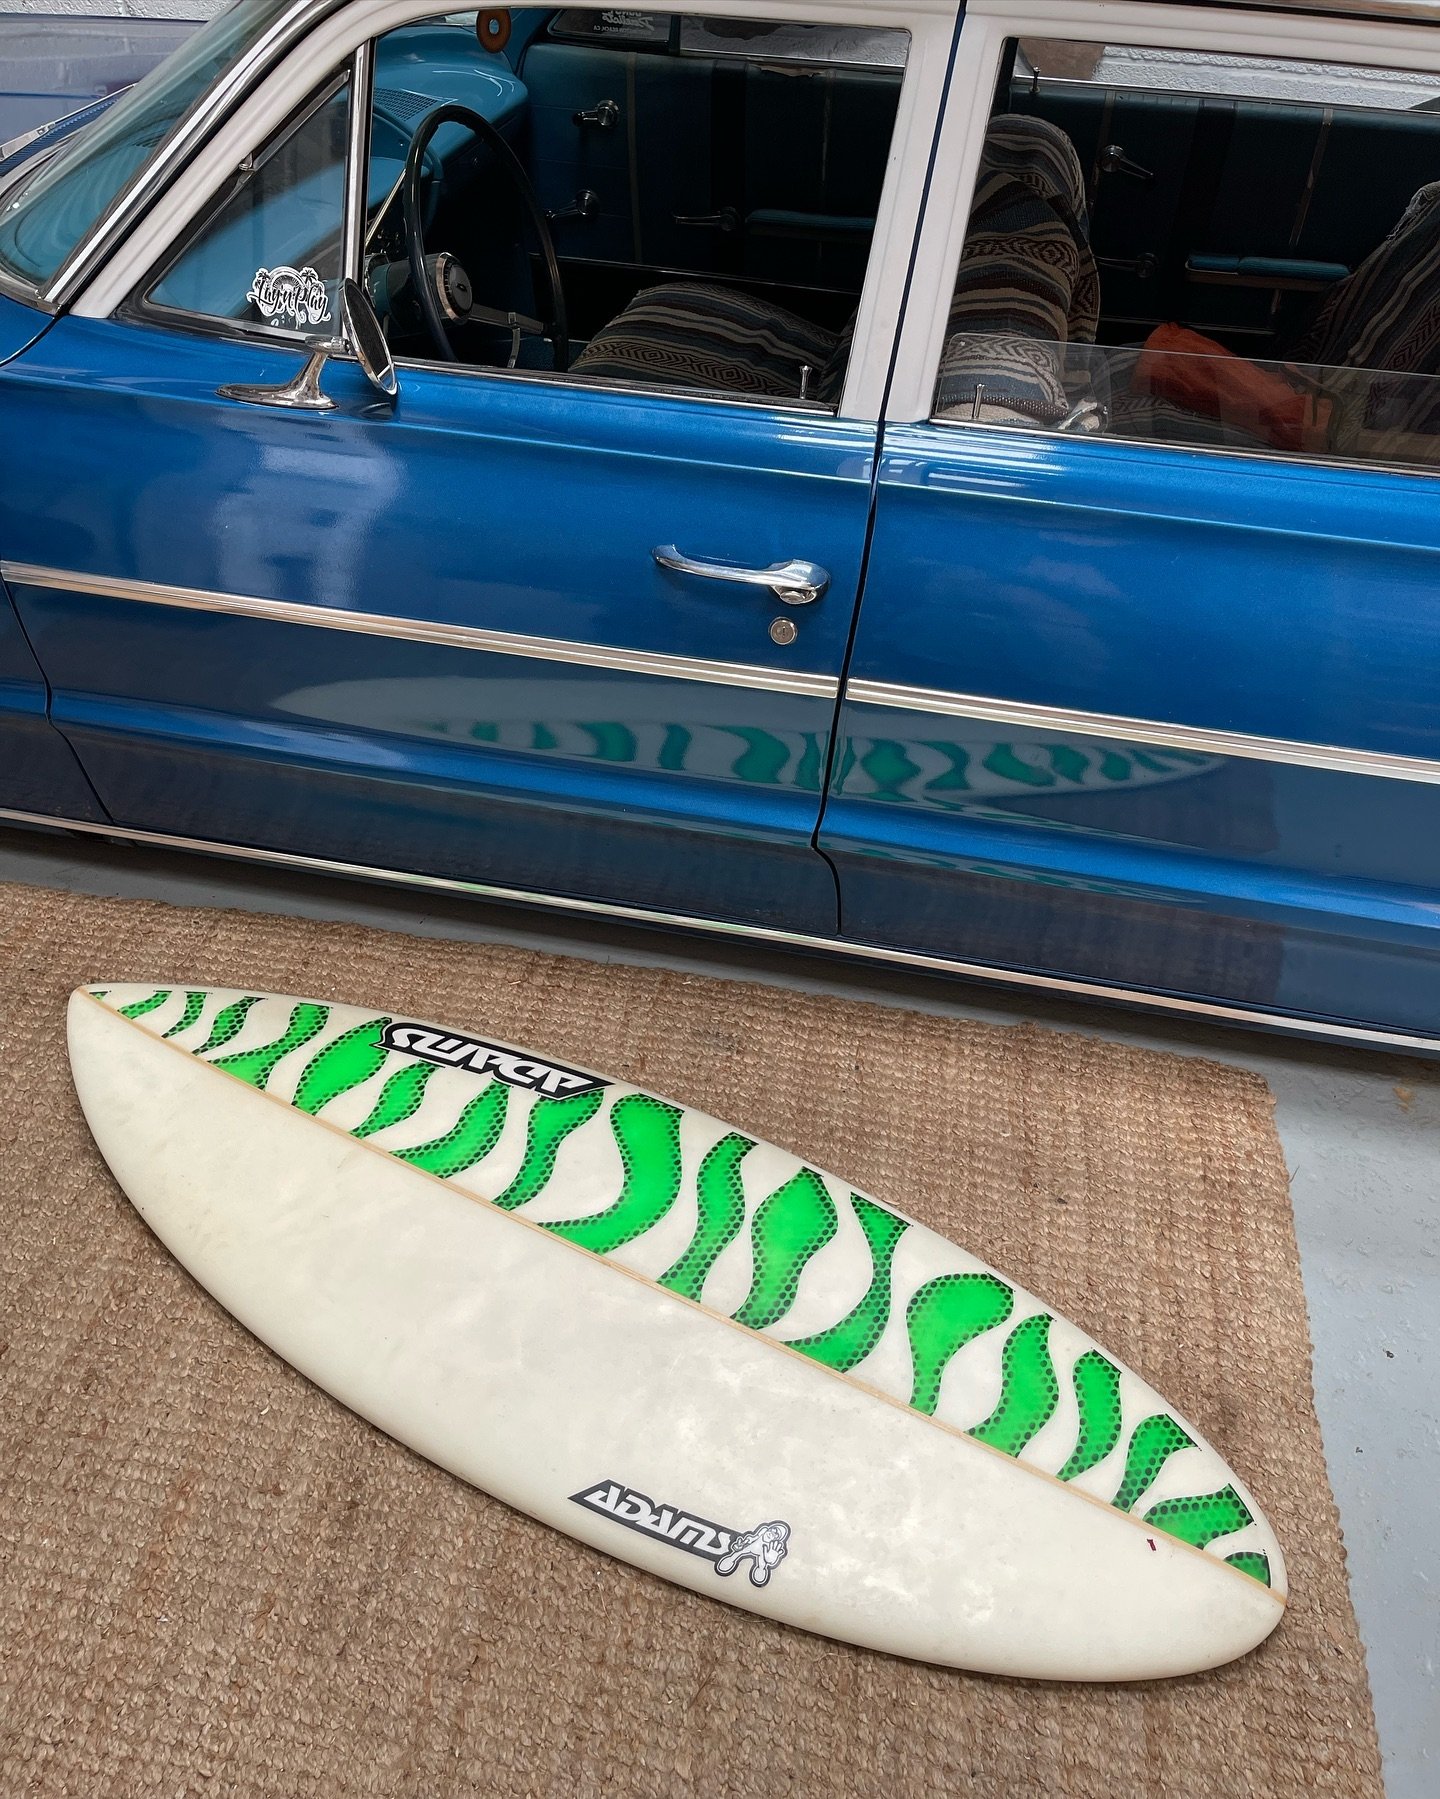 SOLD.. whose after a pro skimboard .. high density foam and glassed strong 💪 used price DM ⚡️

#skimboard #seamonstersupplyco